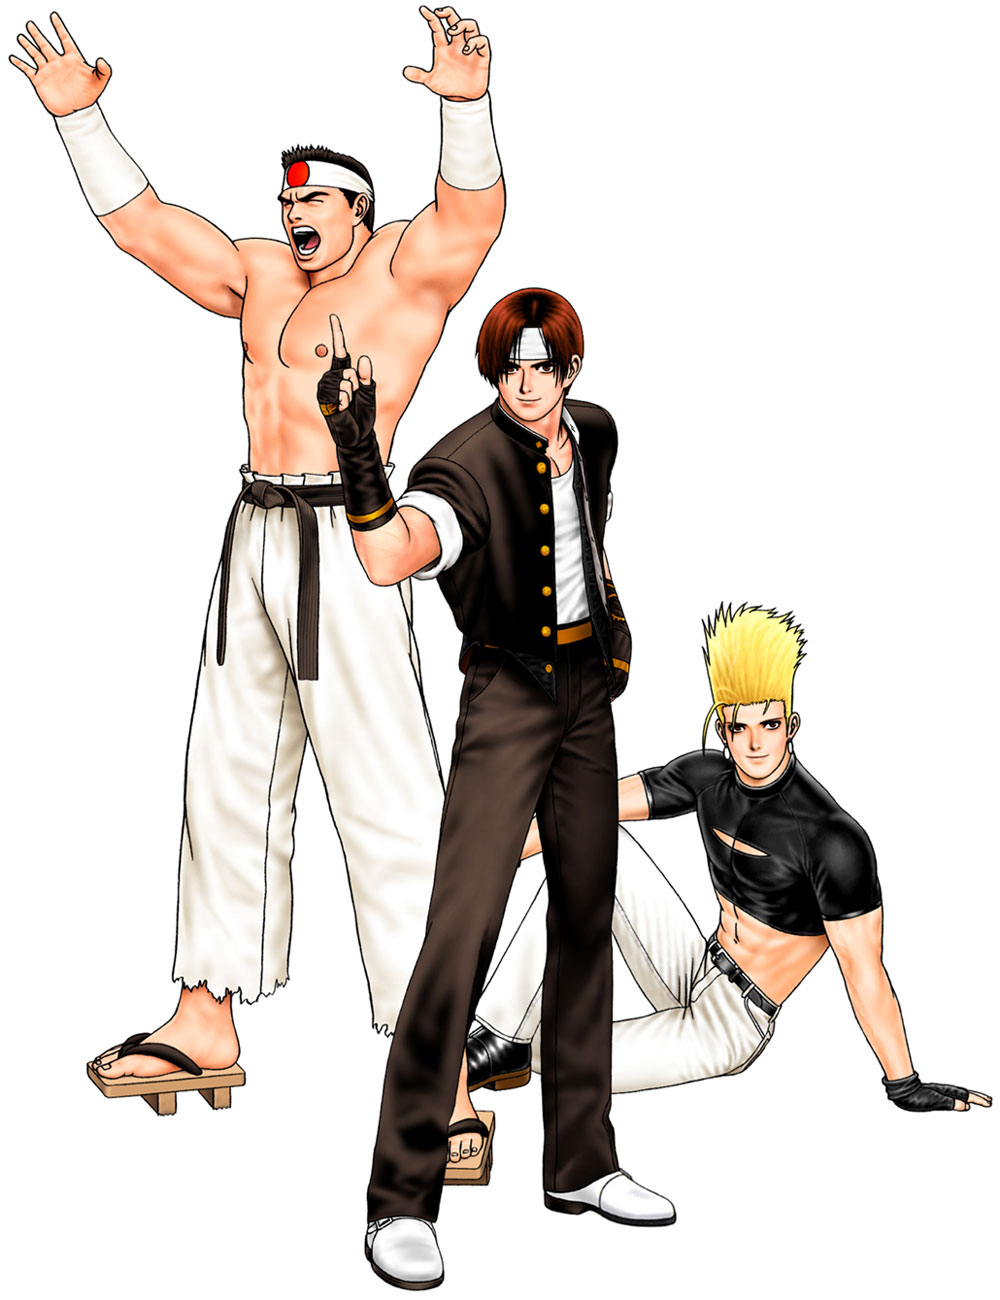 The King of Fighters '98: Ultimate Match Picture